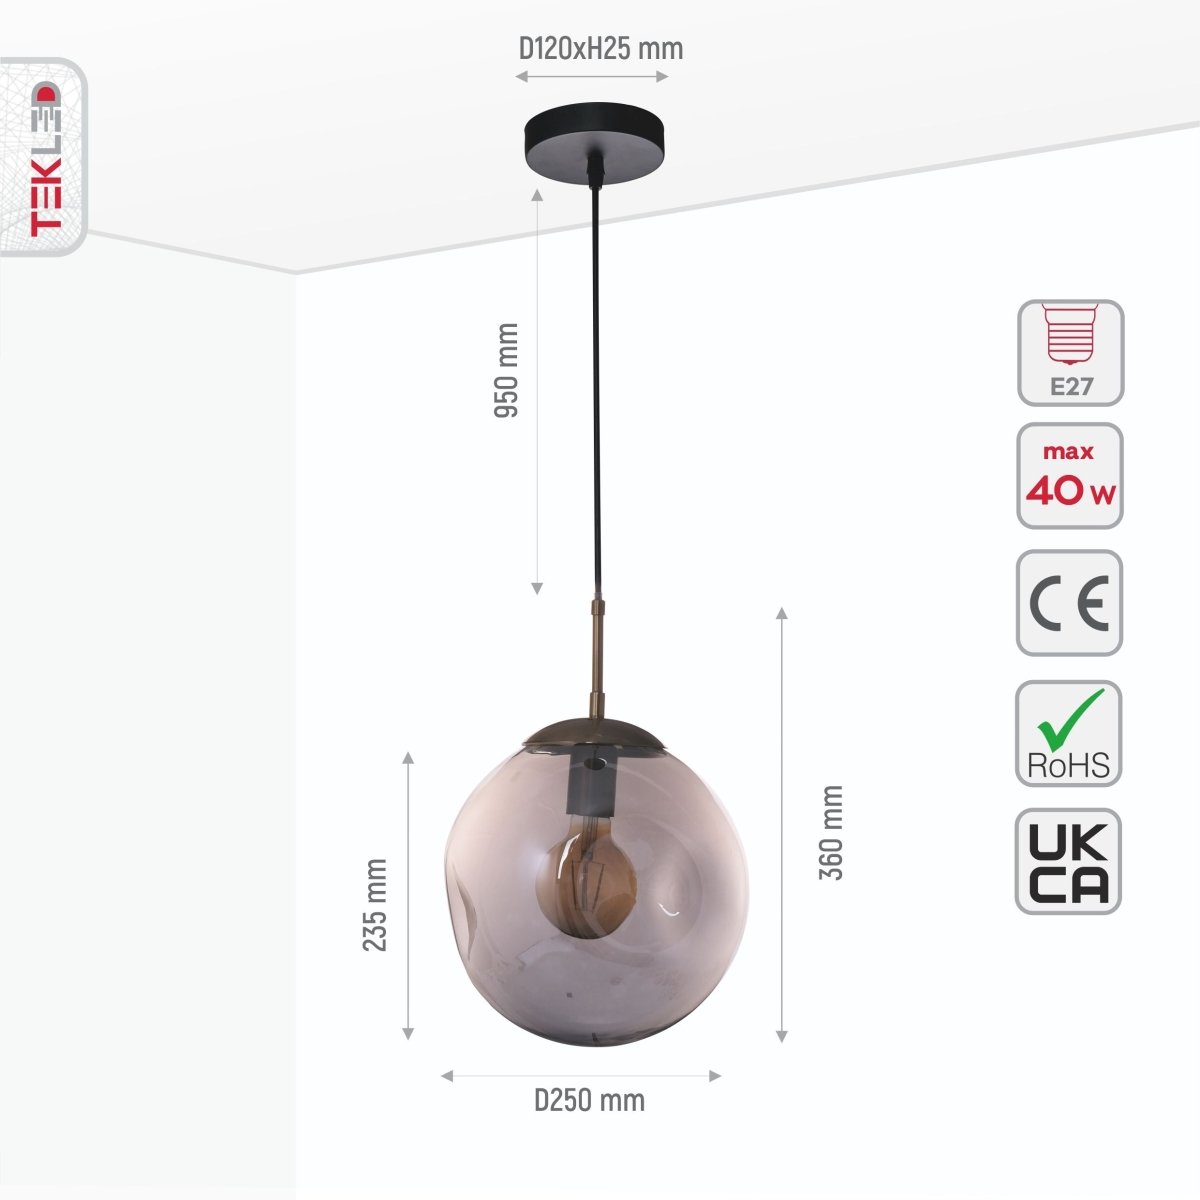 Size and specs of Smoky Glass Crater Pendant Light with E27 Fitting | TEKLED 159-17340